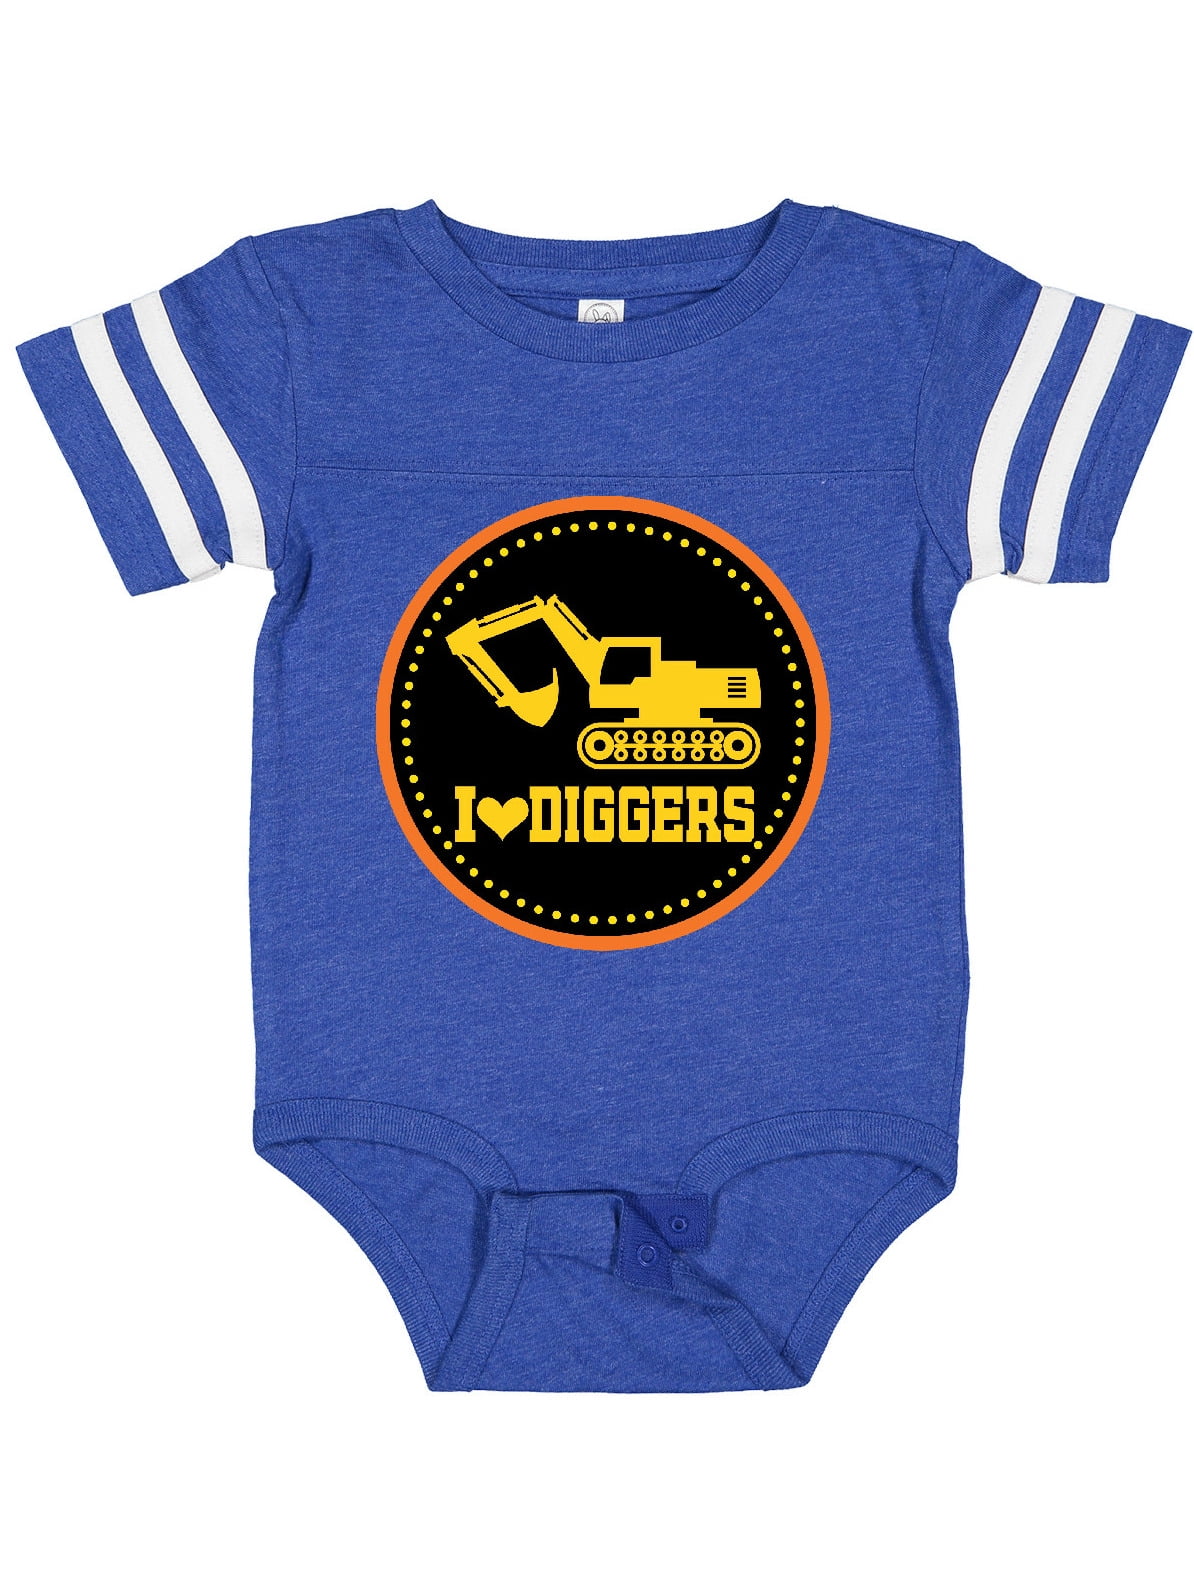 NEW Baby Boys Bodysuit 0-3 Months Backhoe Blue Creeper Outfit 1 Piece Infant 